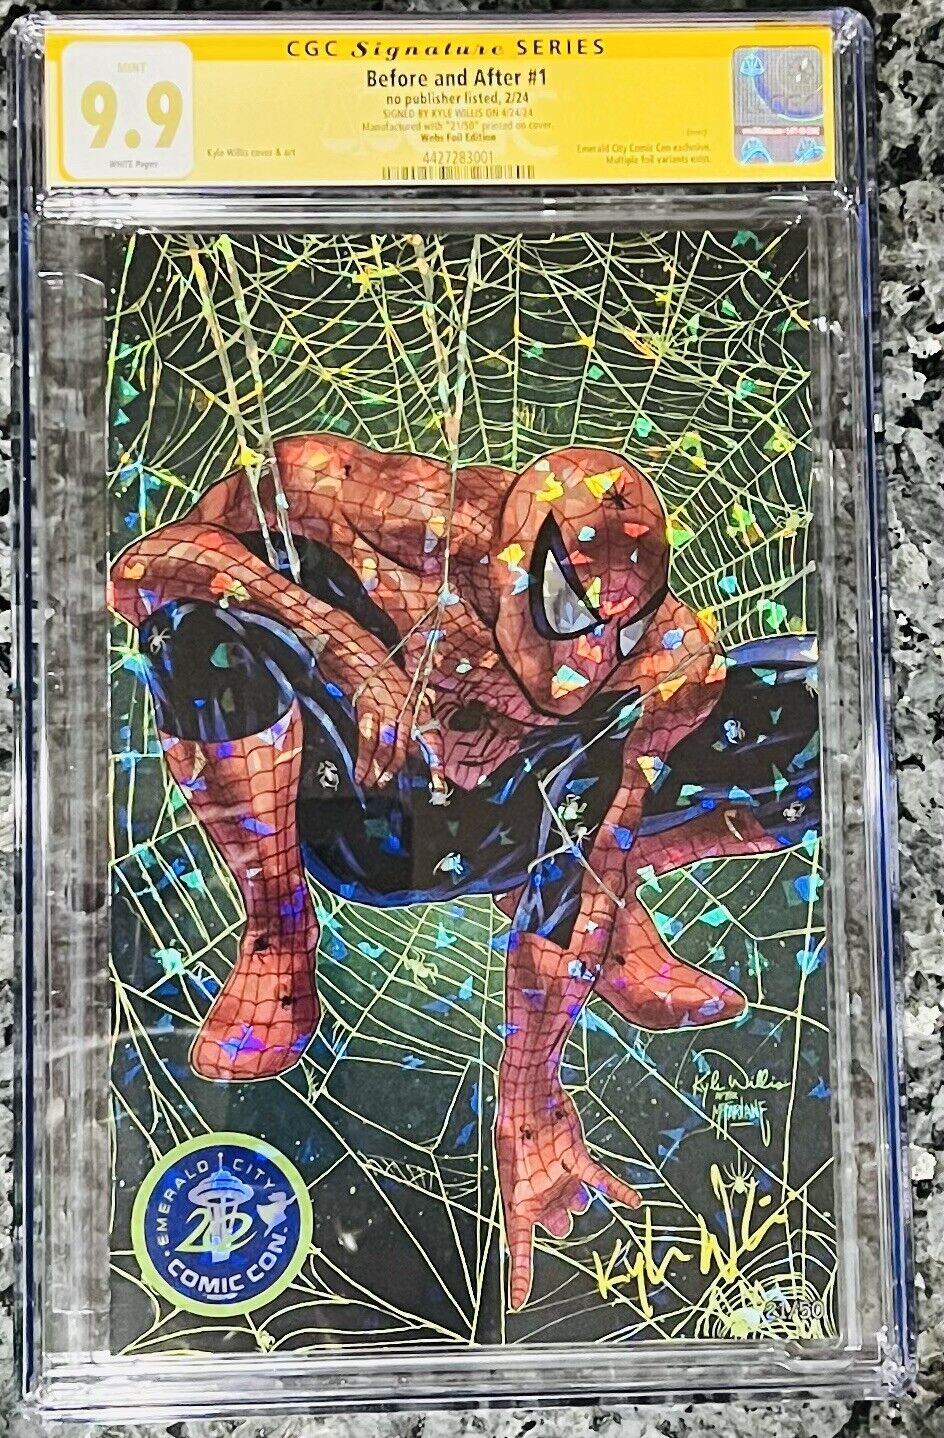 CGC 9.9 BEFORE AND AFTER #1 Spider-man KYLE WILLIS SIGNED VIRGIN FOIL #21/50